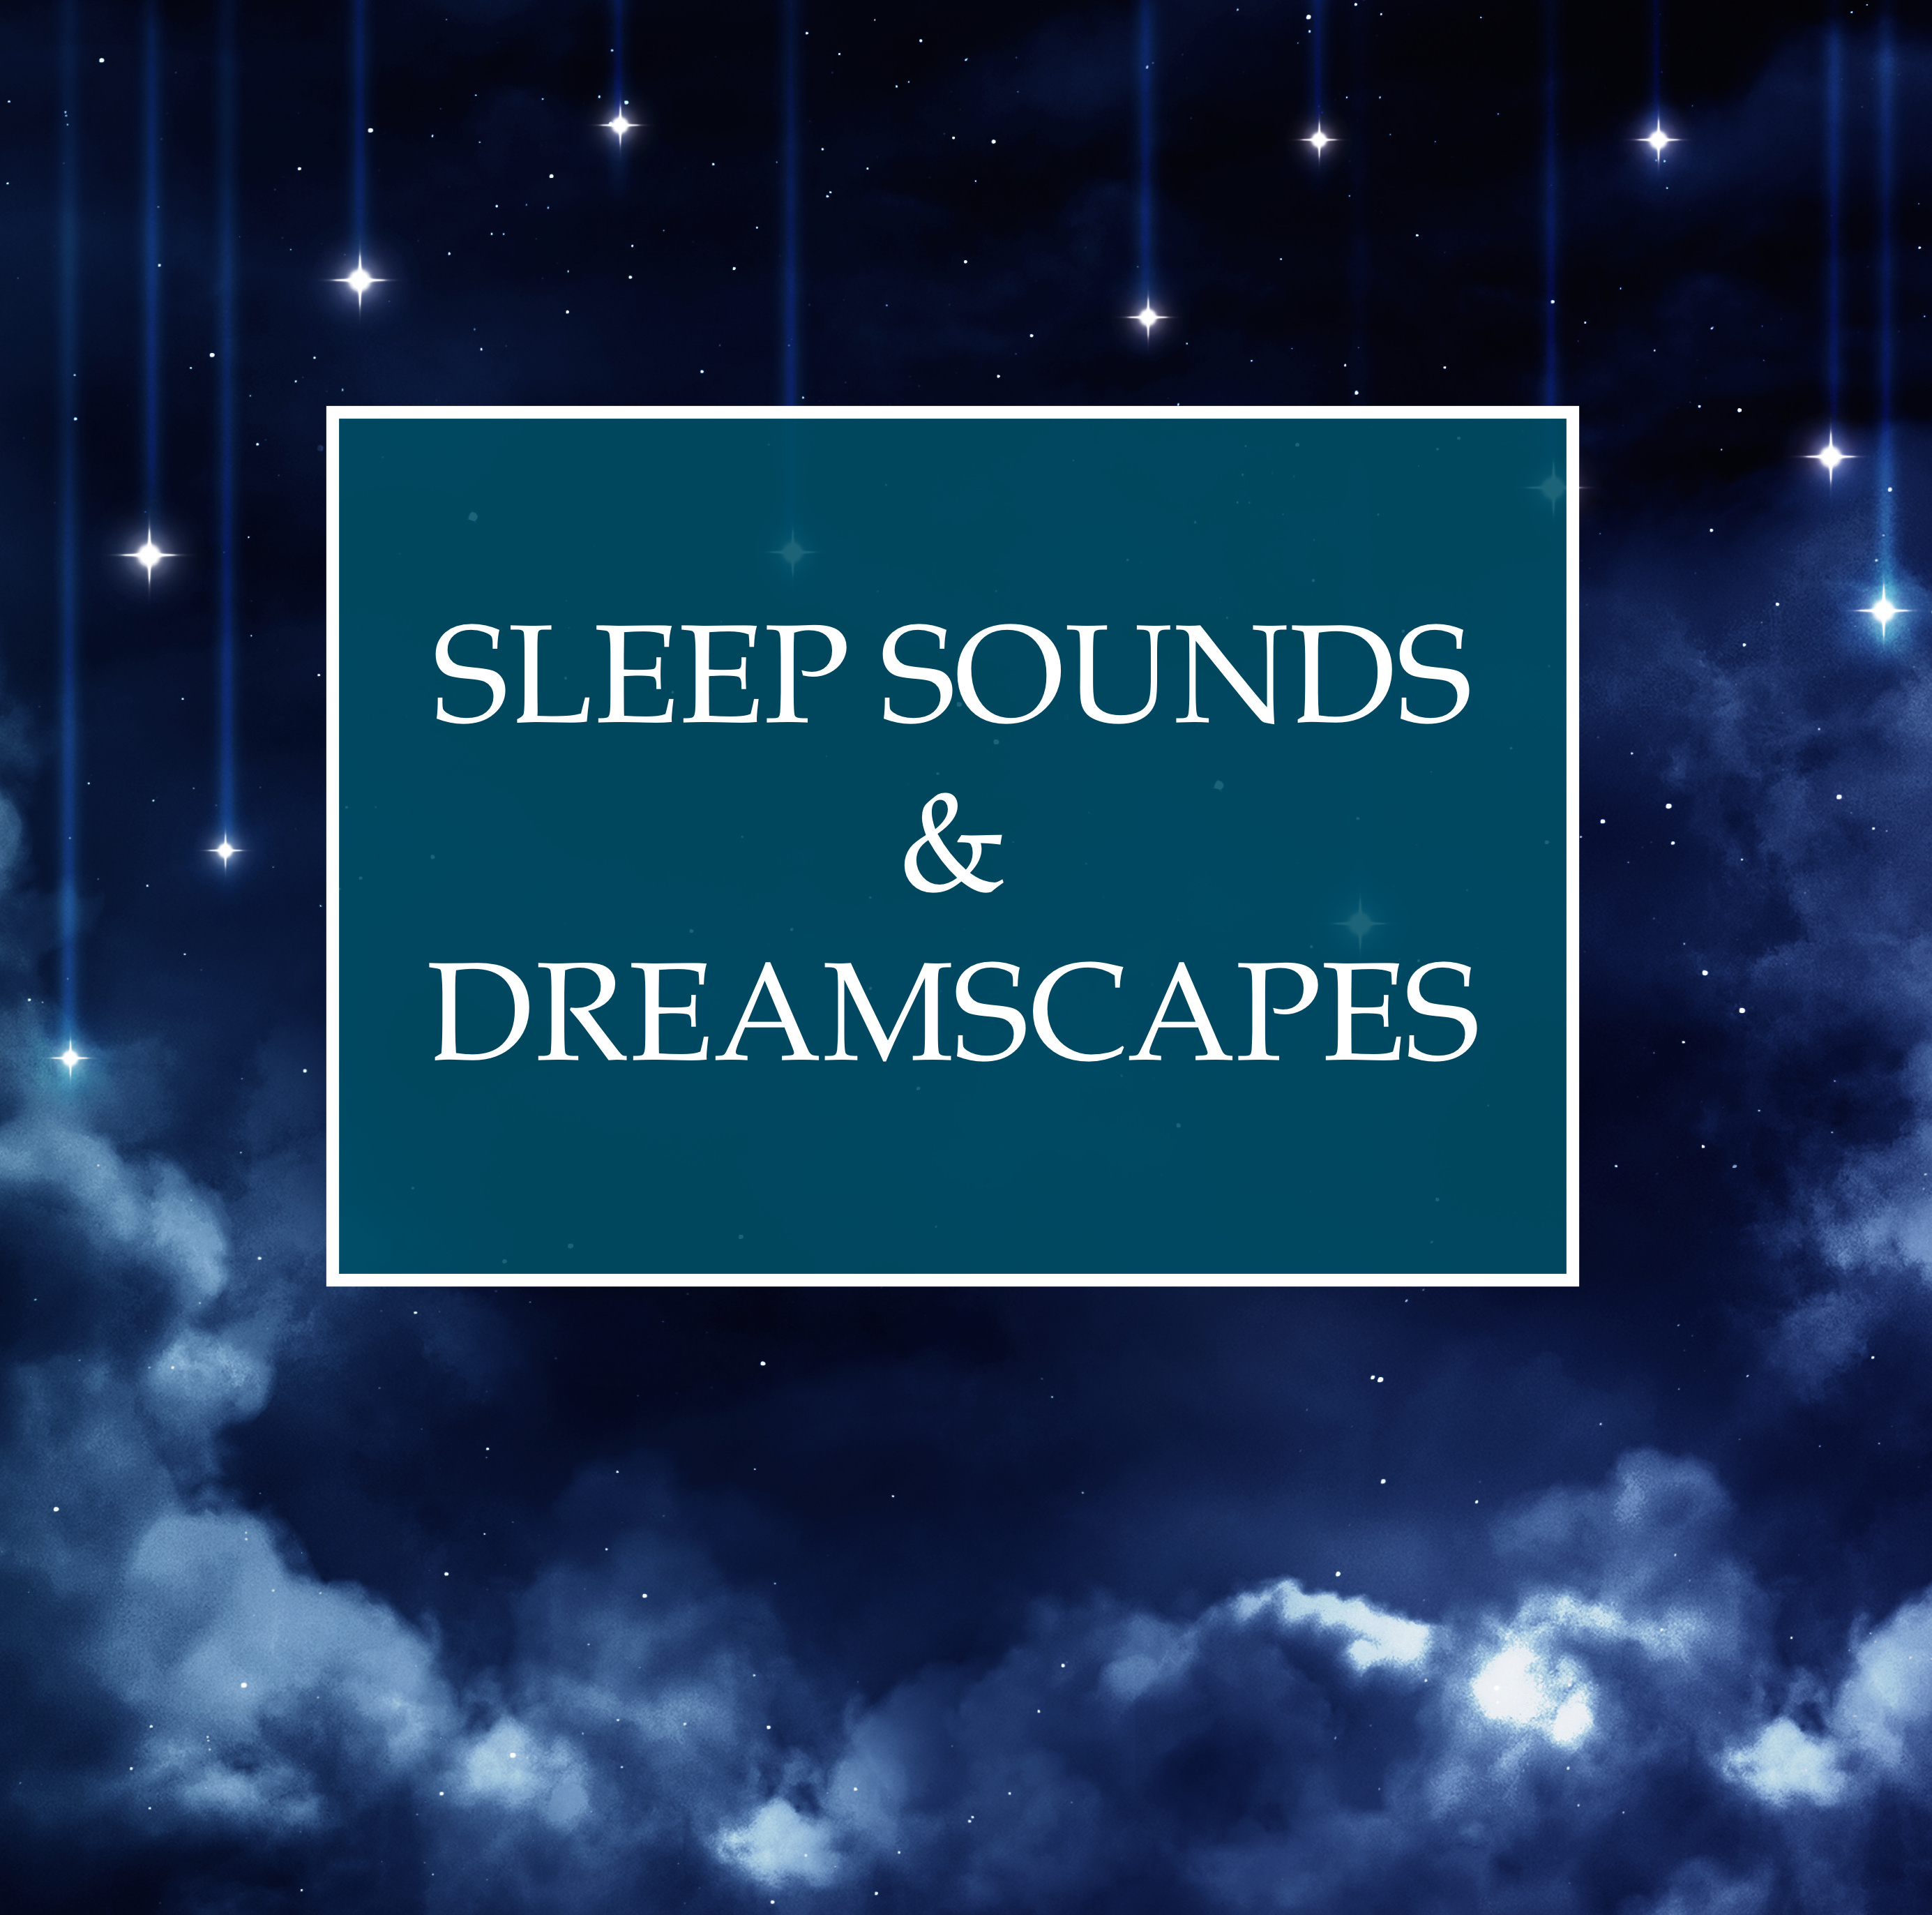 Sleep Sounds  Dreamscapes   Relaxing and Tranquil Music to For Deep Sleep, Lucid Dreaming, and Transcendental Meditation Sessions